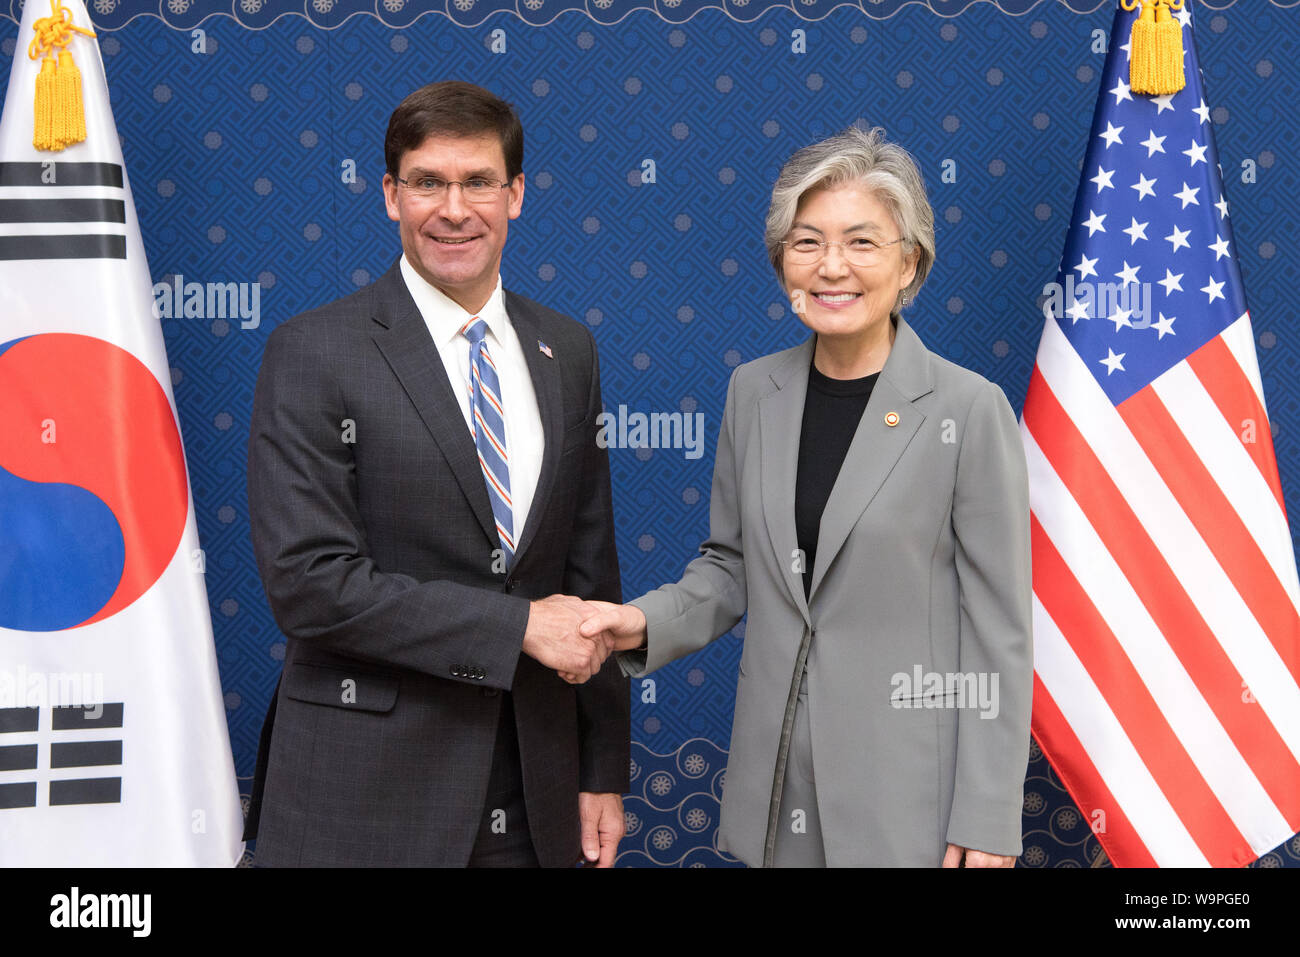 U.S. Secretary of Defense Dr. Mark T. Esper meets with Korean Foreign Minister Kang Kyung-wha in Seoul, Republic of Korea, Aug. 9, 2019. (DoD photo by U.S. Army Sgt. Amber I. Smith) Stock Photo